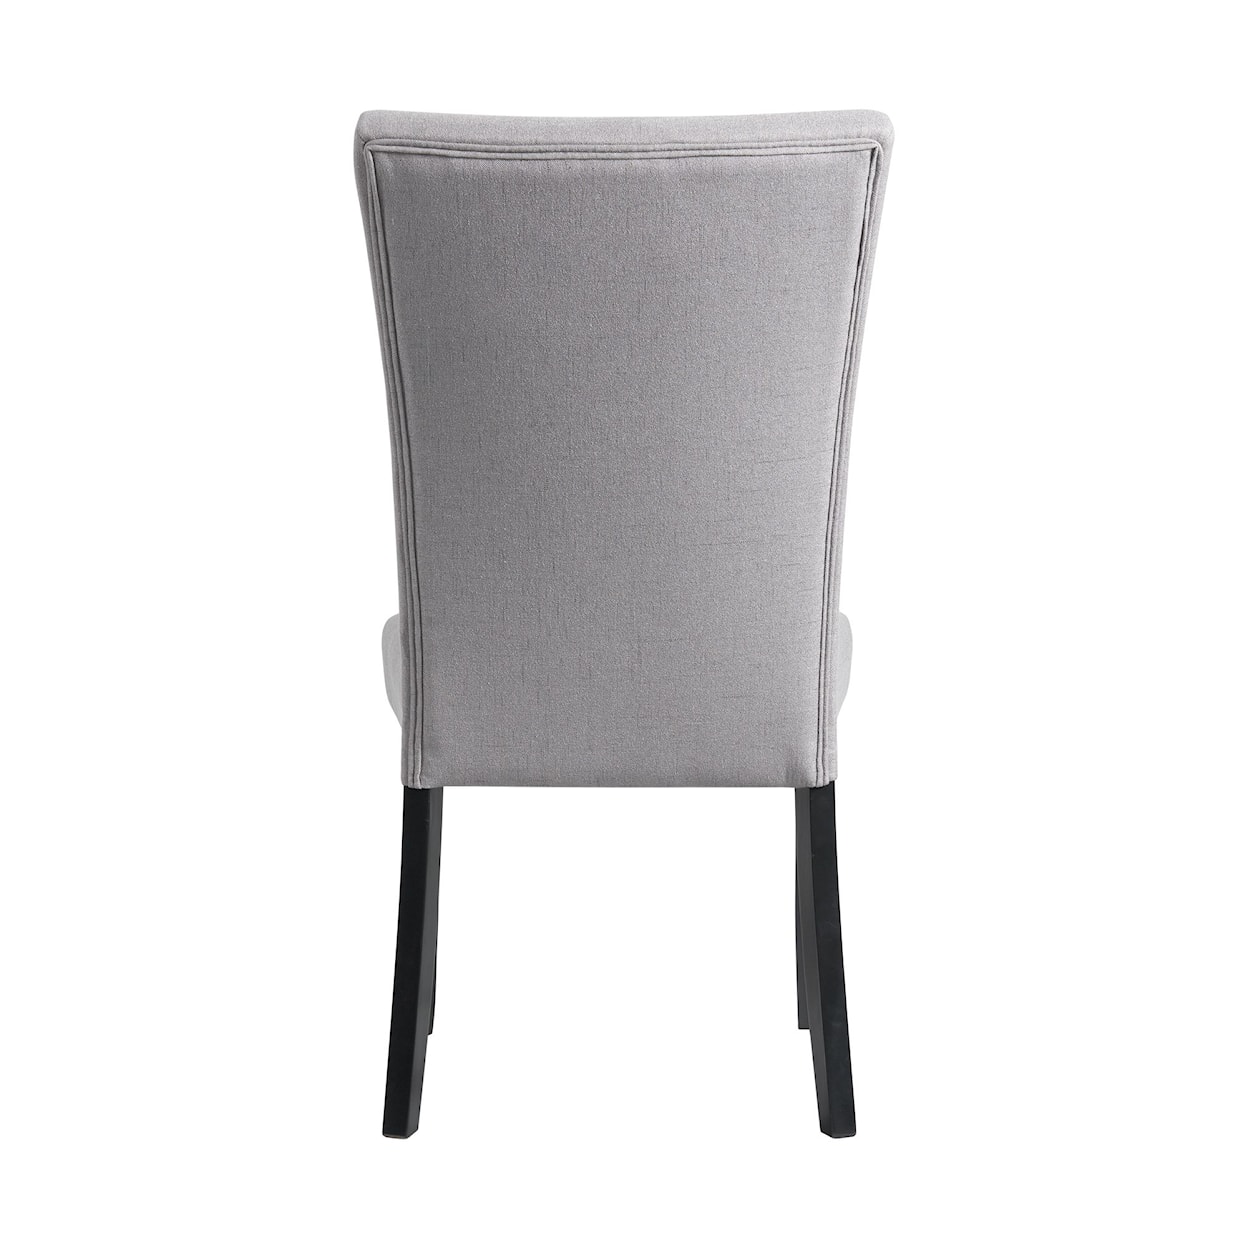 Elements Beckley Upholstered Dining Chair